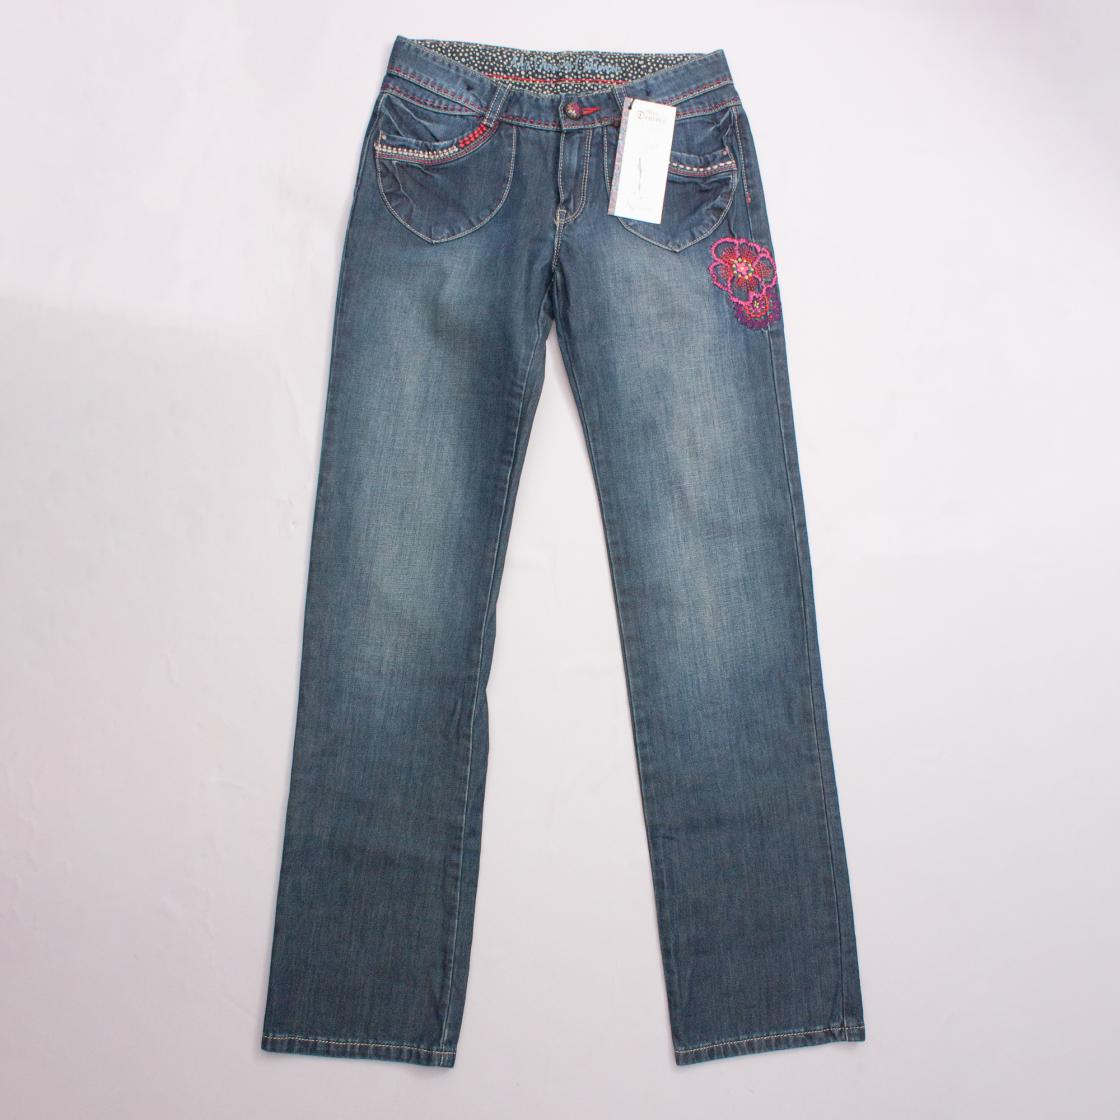 Catimini Embroidered Jeans "Brand New"